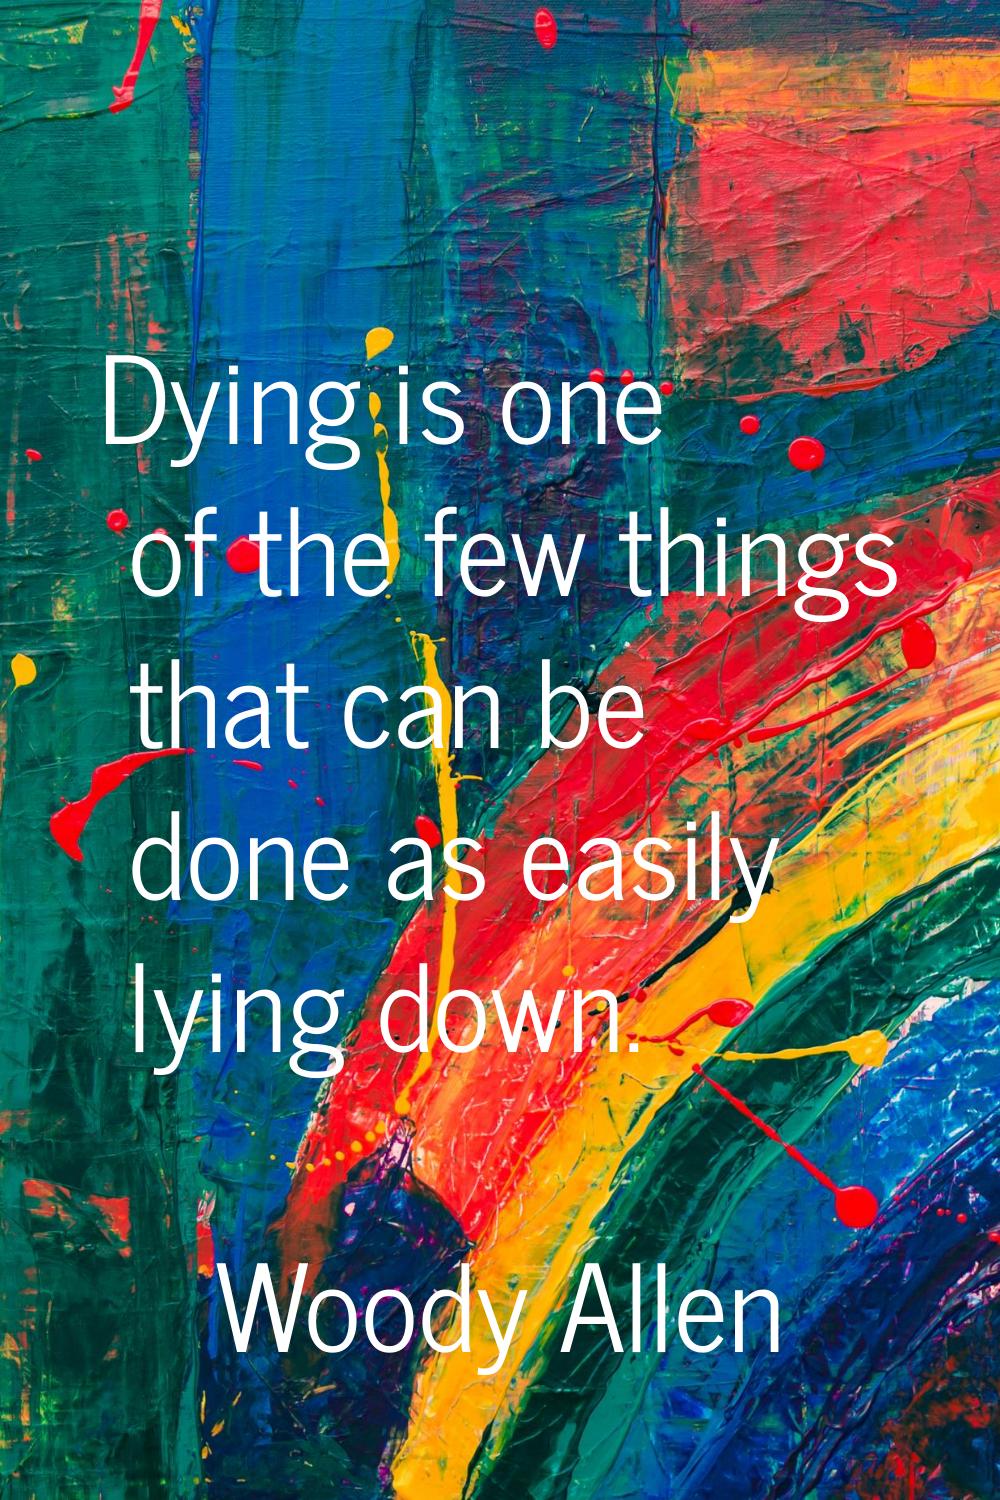 Dying is one of the few things that can be done as easily lying down.